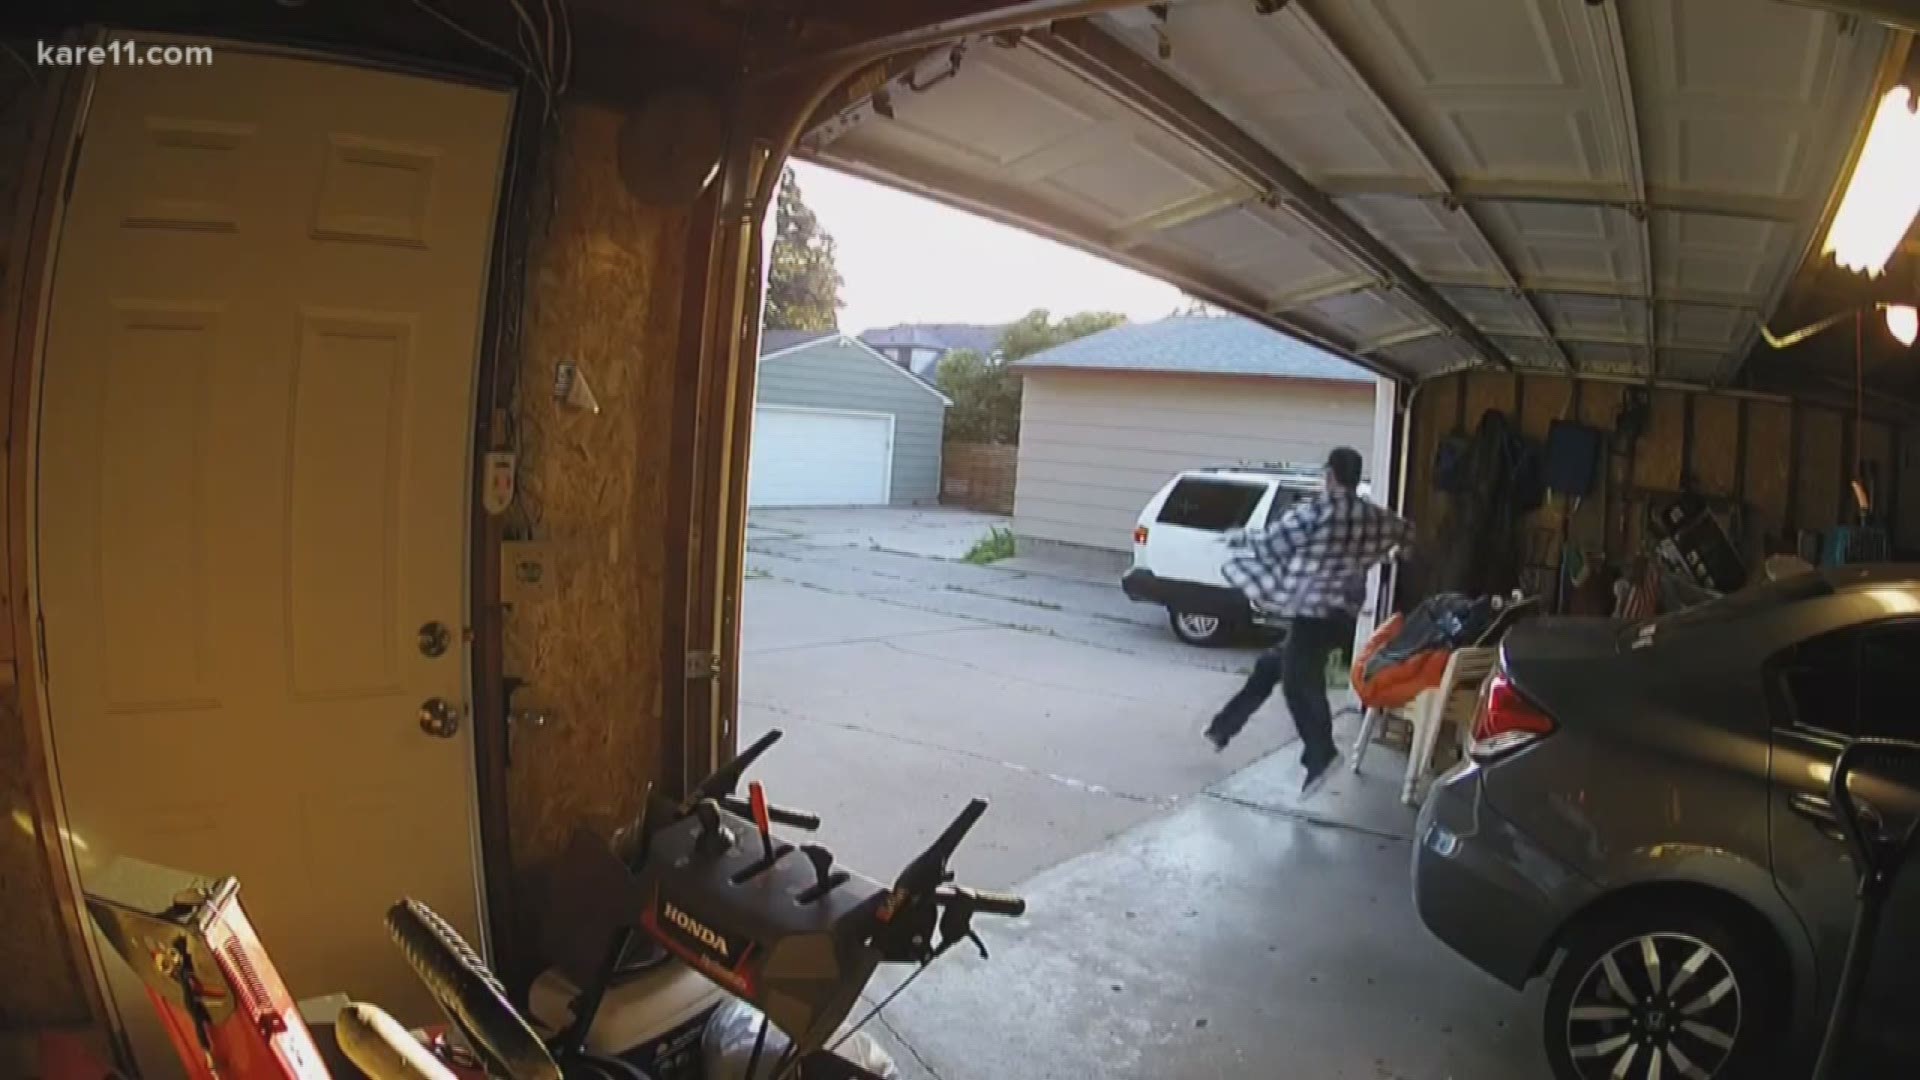 Homeowners in northeast Minneapolis caught would-be thieves breaking into their garage on almost crystal-clear security camera video...in broad daylight.